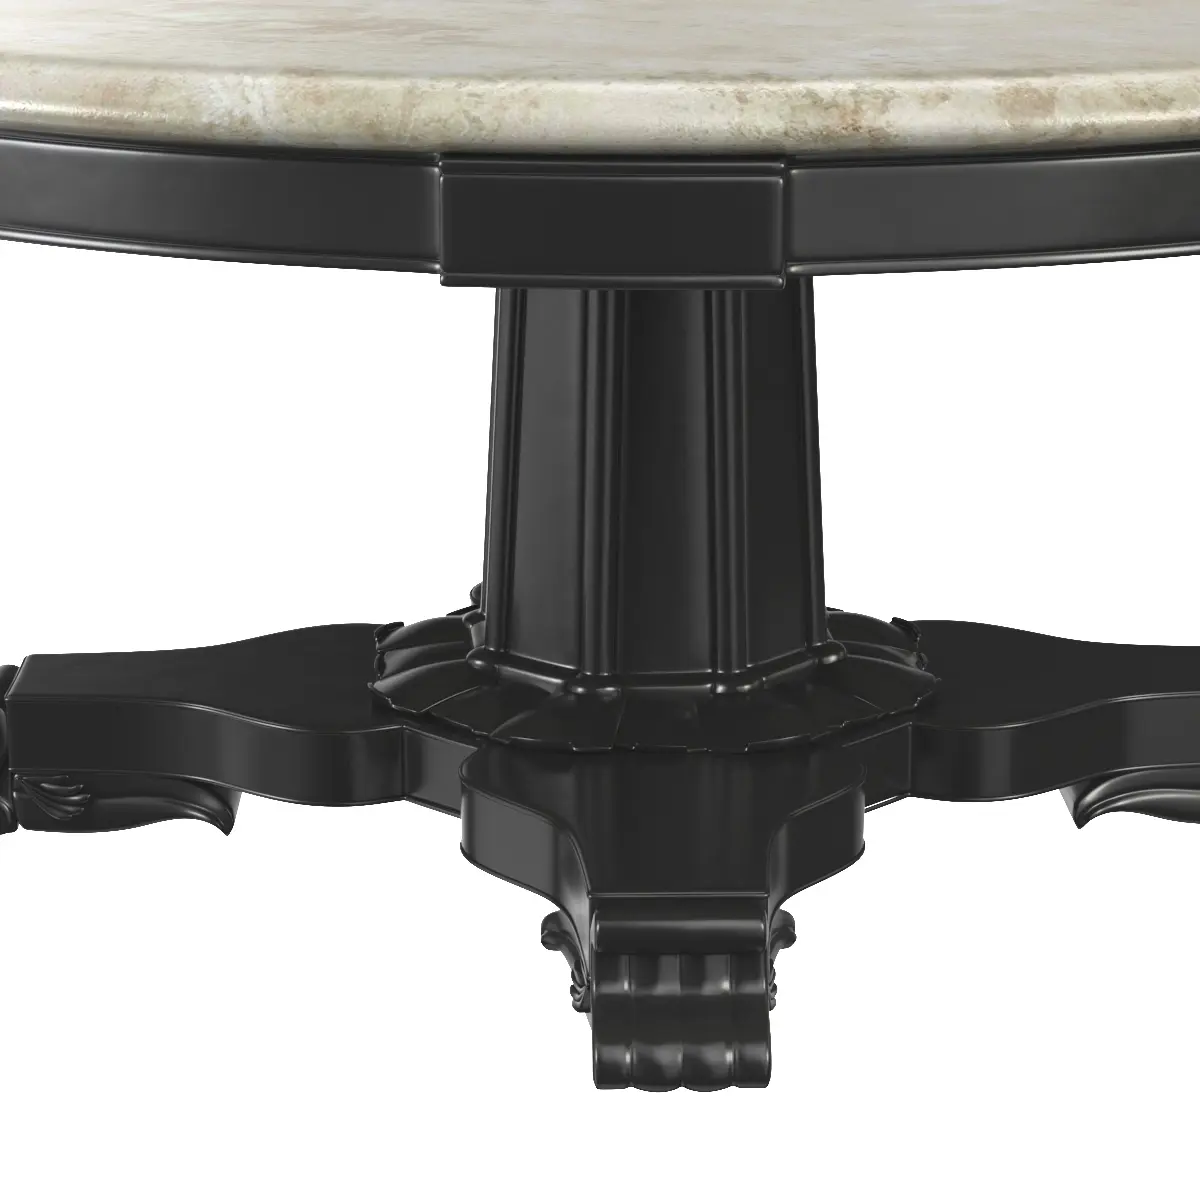 Anglo-Indian Marble and Ebonized Mahogany Centre Table 3D Model_05